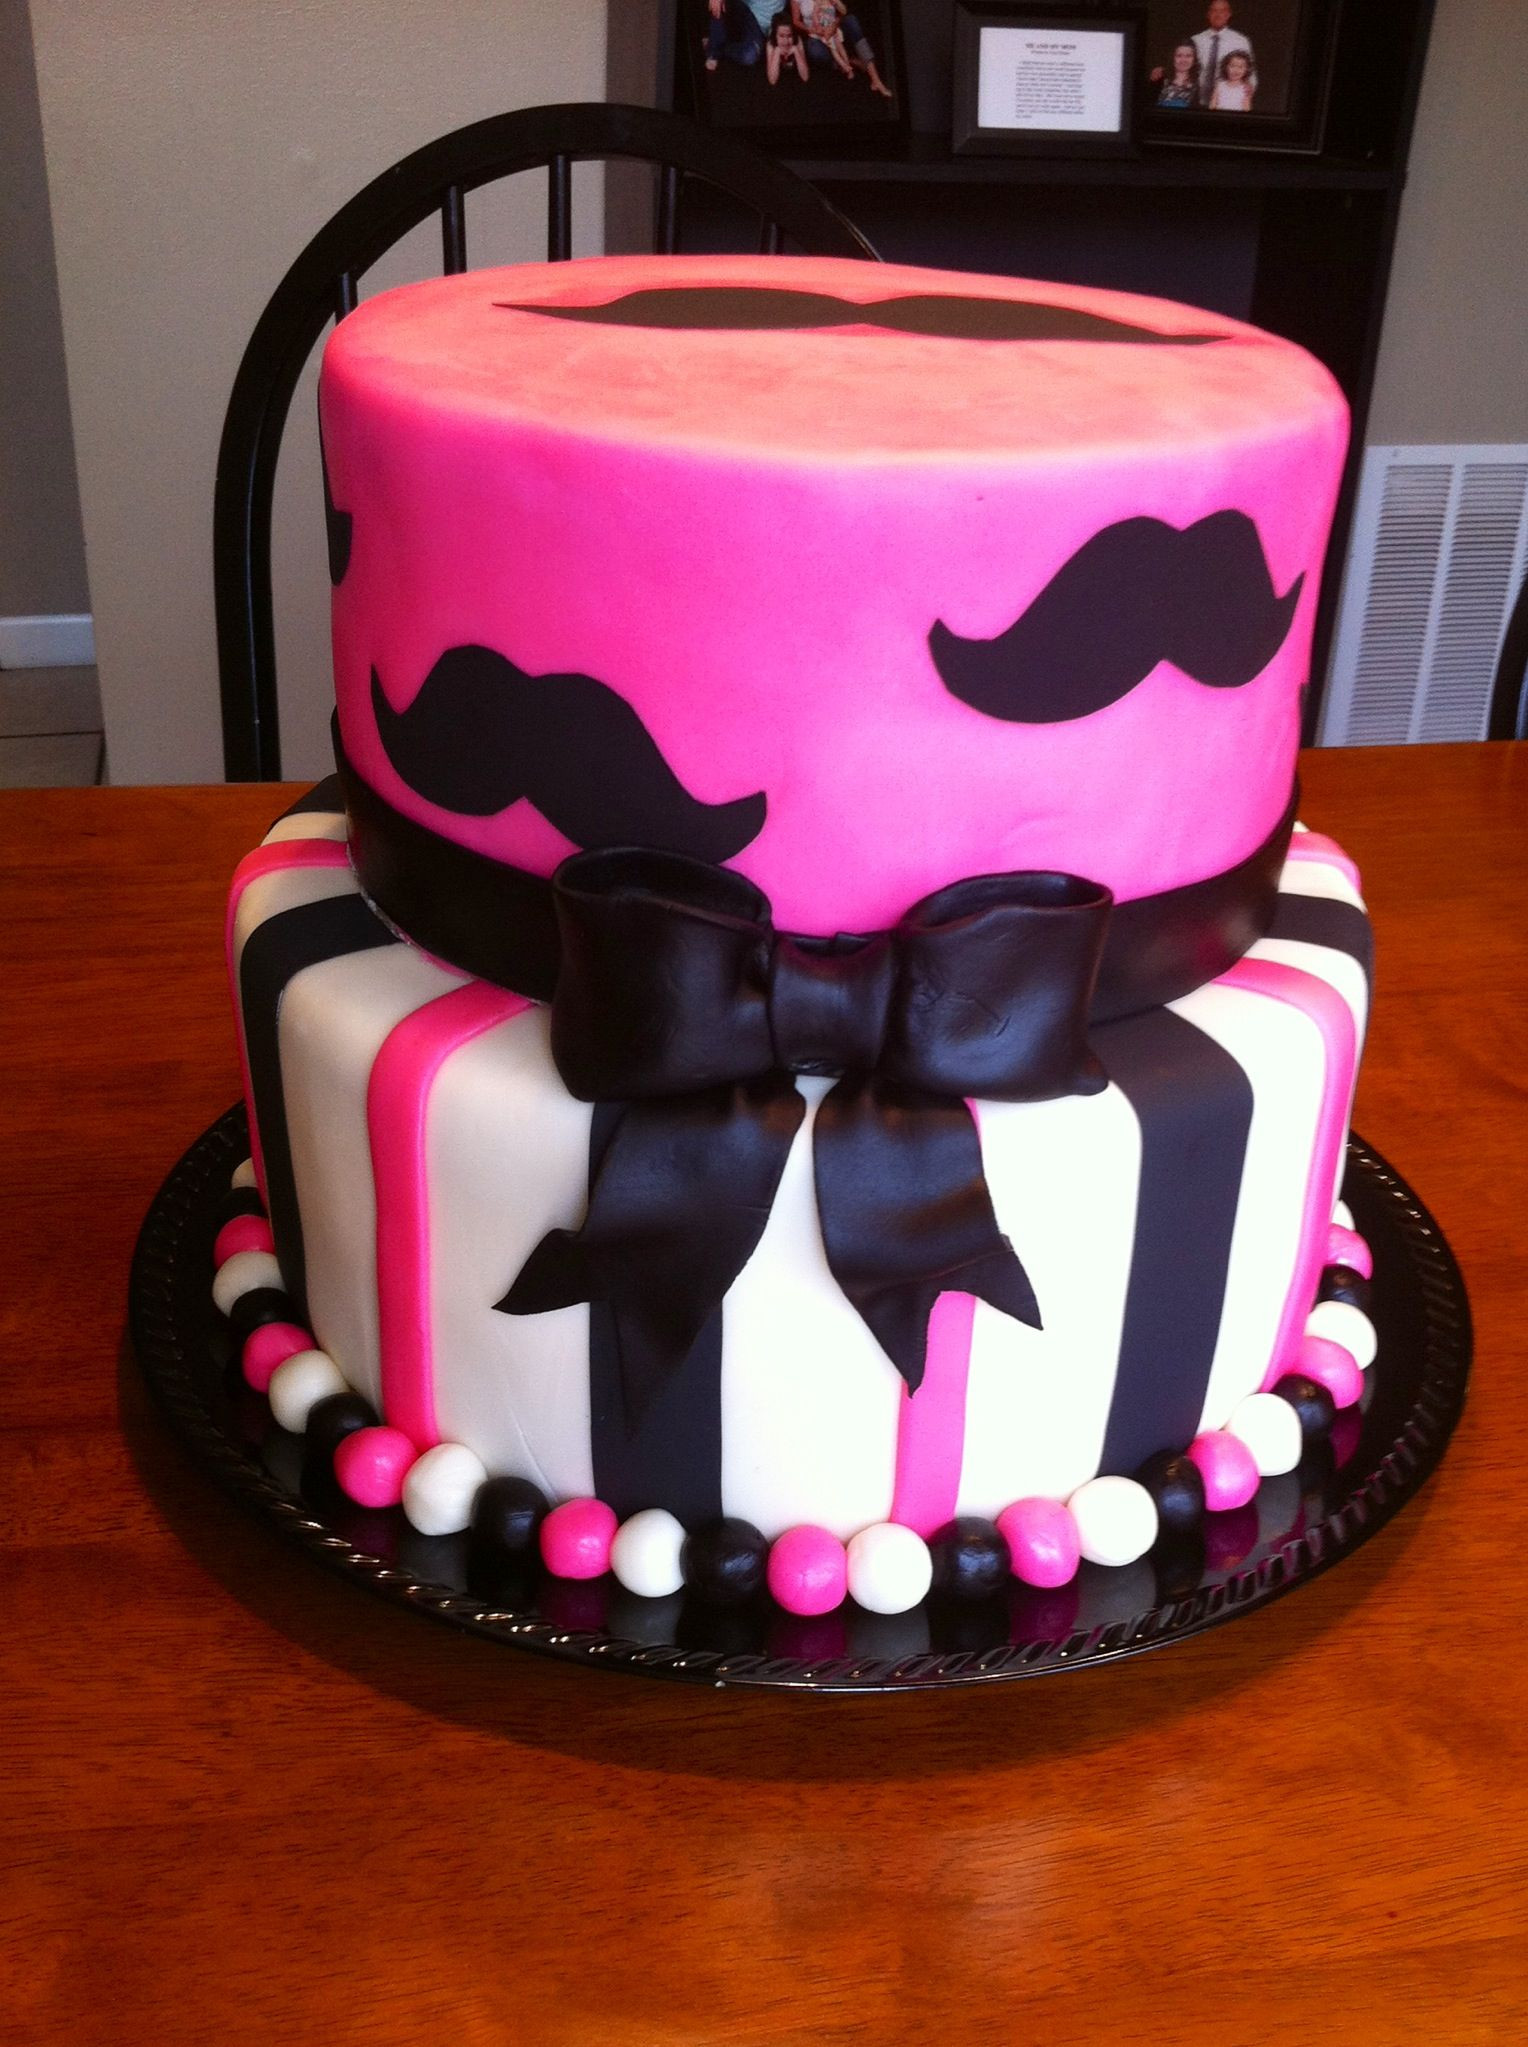 Mustache Birthday Cake
 Mustache birthday cake ybe not with pink but teal or